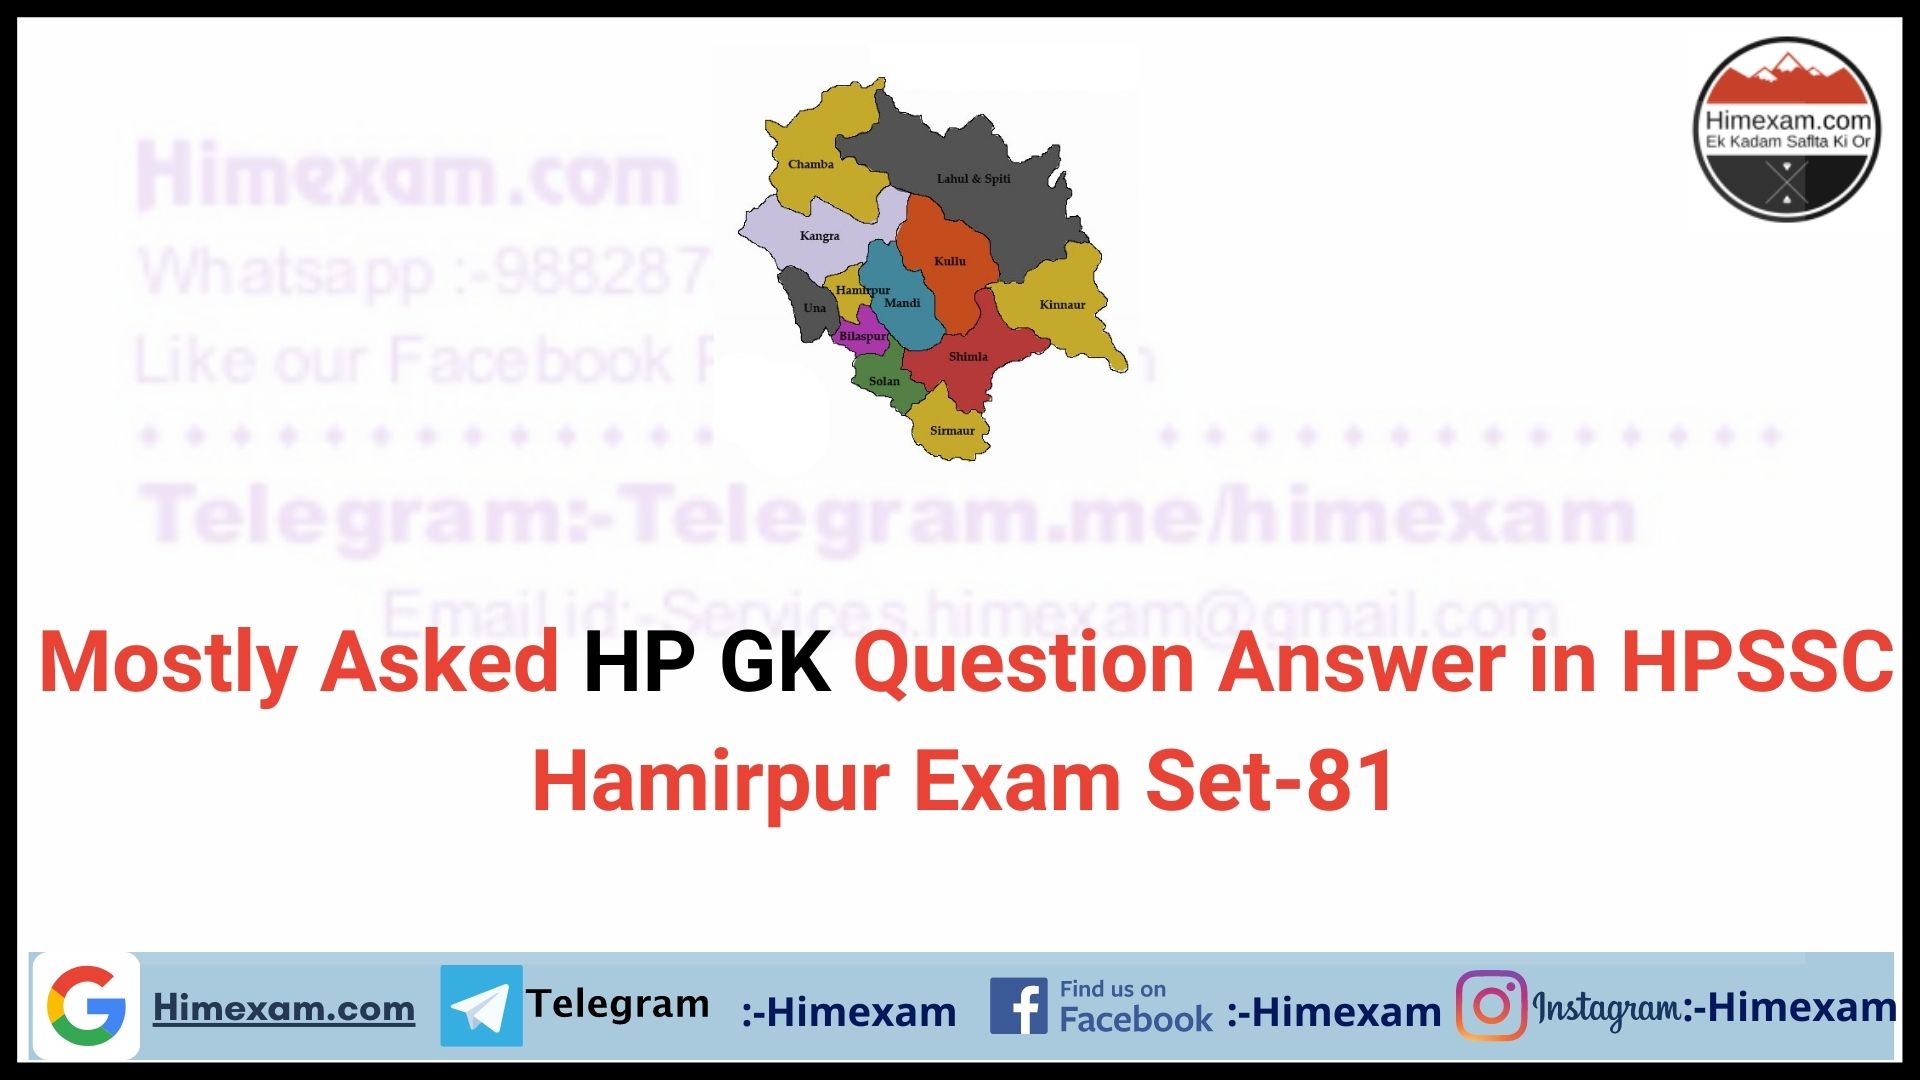 Mostly Asked HP GK Question Answer in HPSSC Hamirpur Exam Set-81